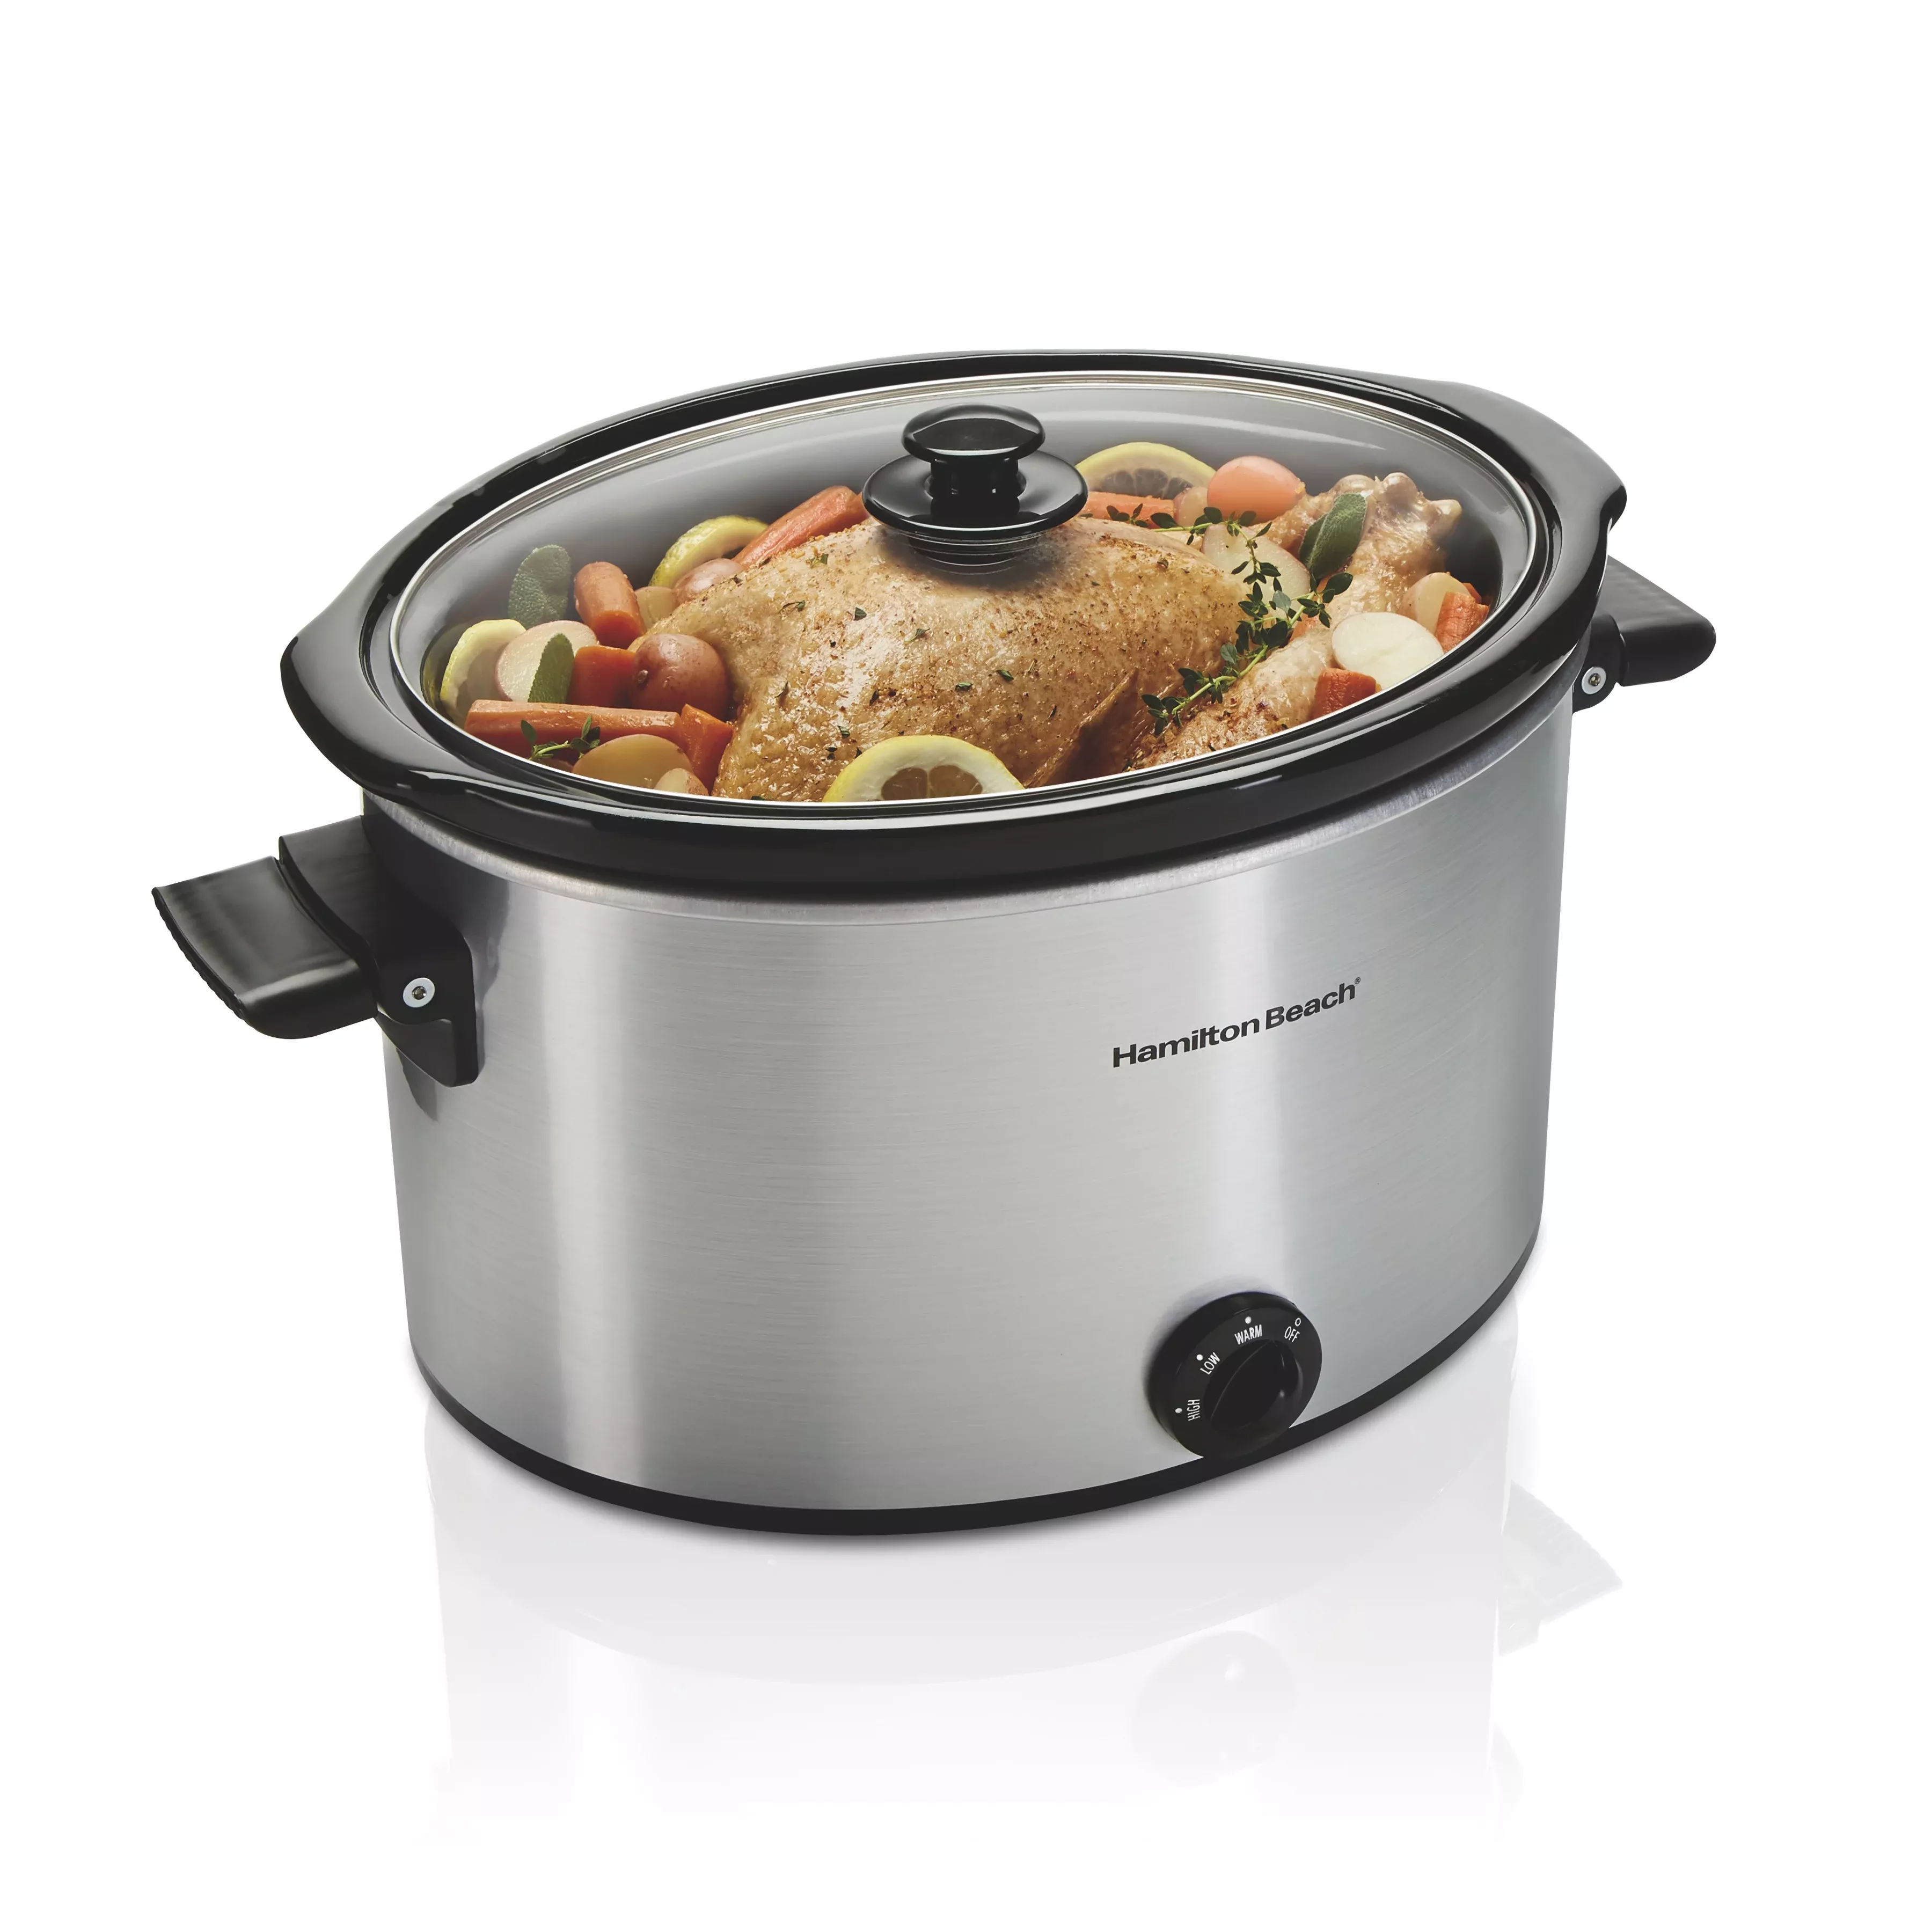 Hamilton Beach 8-Cup Rice Cooker and Steamer | Model#37519